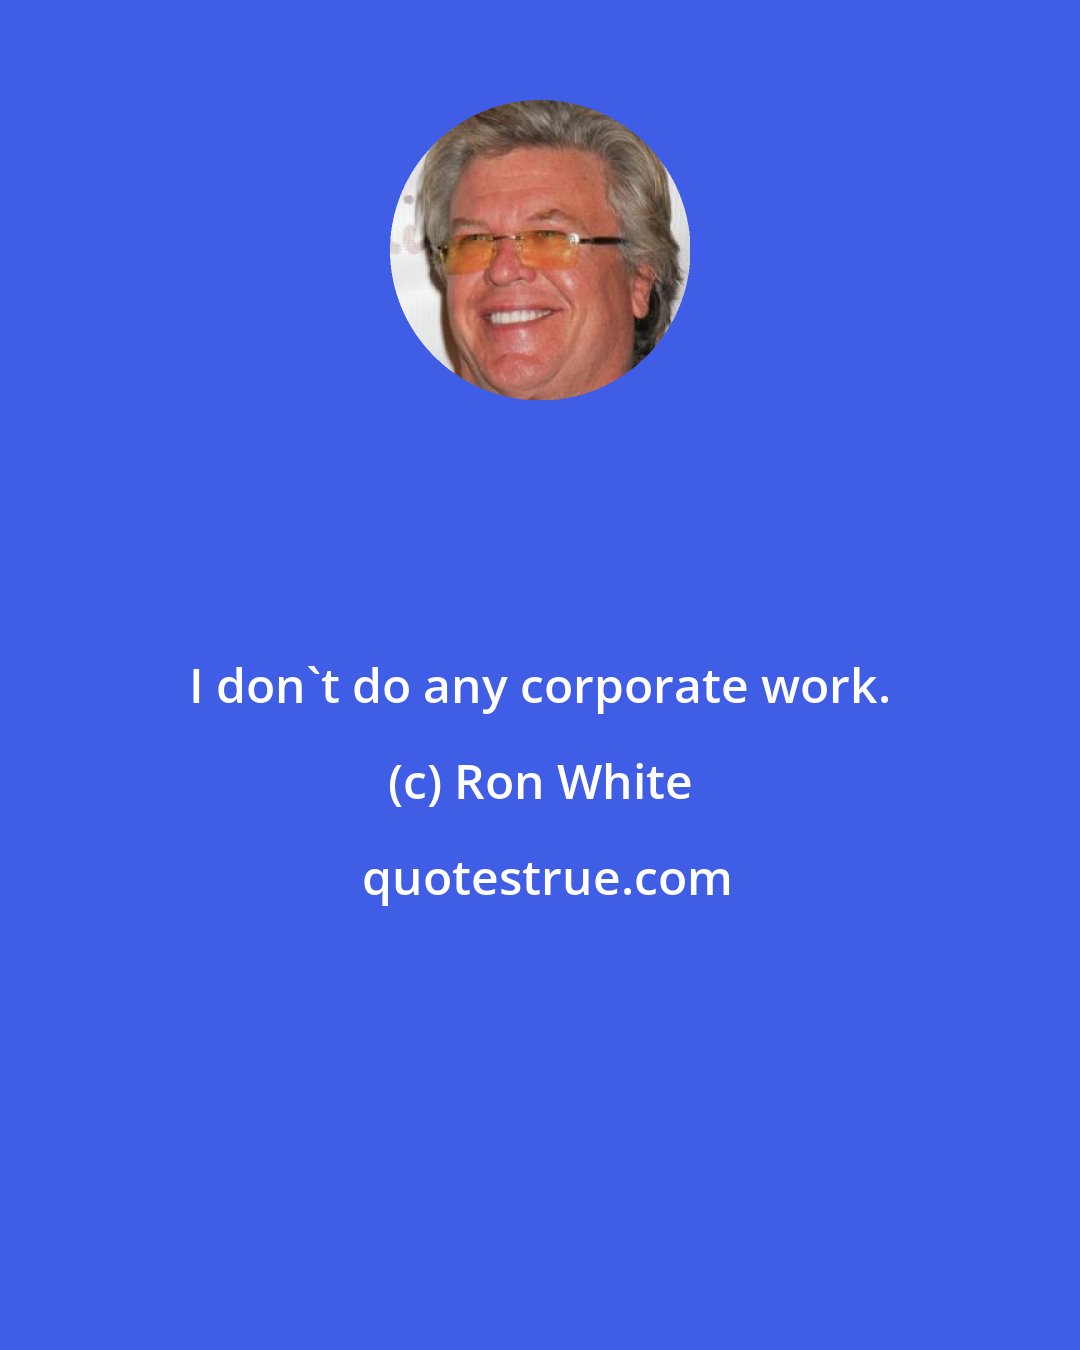 Ron White: I don't do any corporate work.